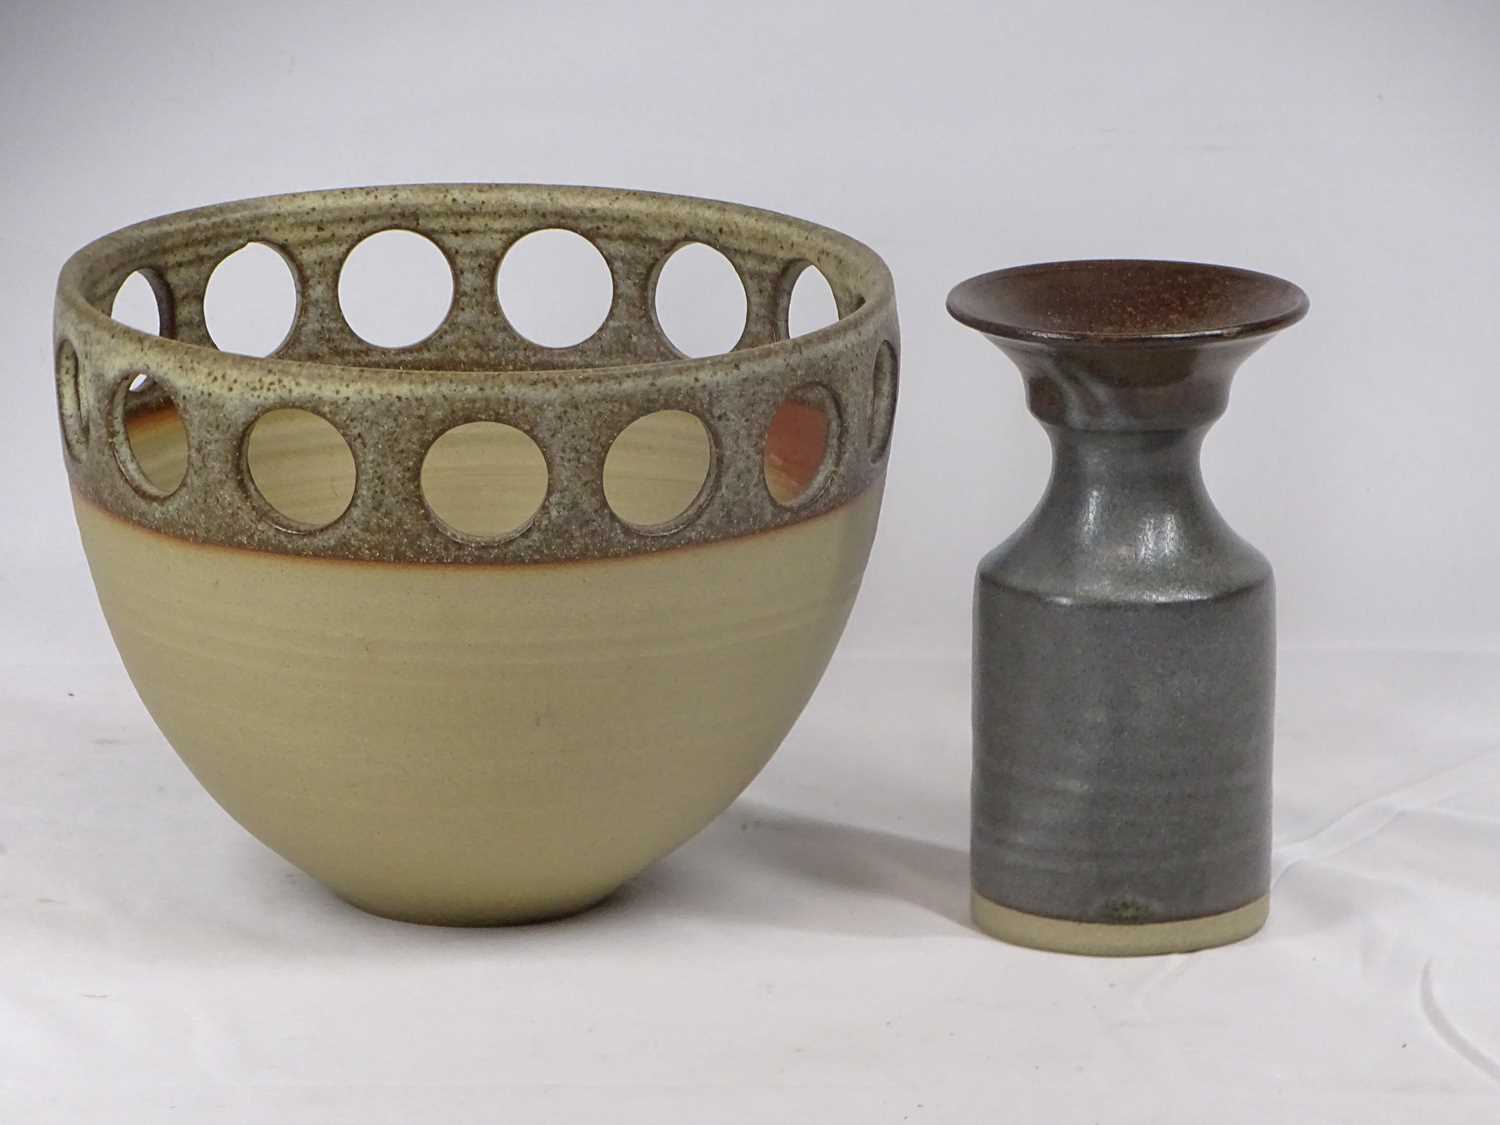 STUDIO POTTERY STONEWARE BOWLS, vases and an ornamental bird figurine - Image 3 of 3